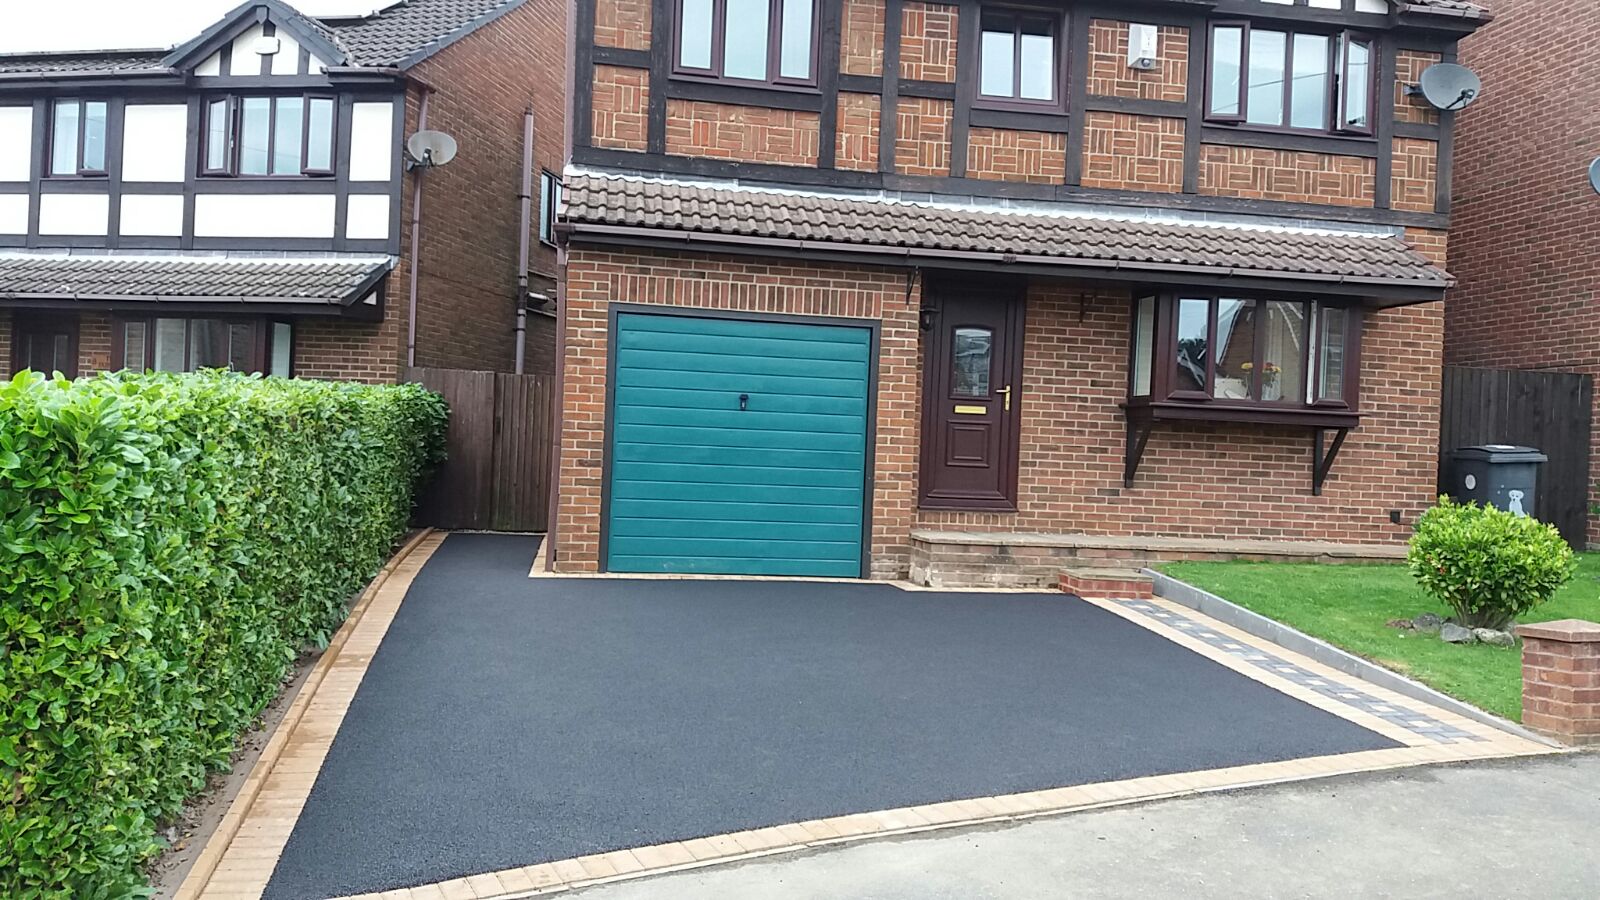 Find The Right Driveway Installers For Overall Perfection